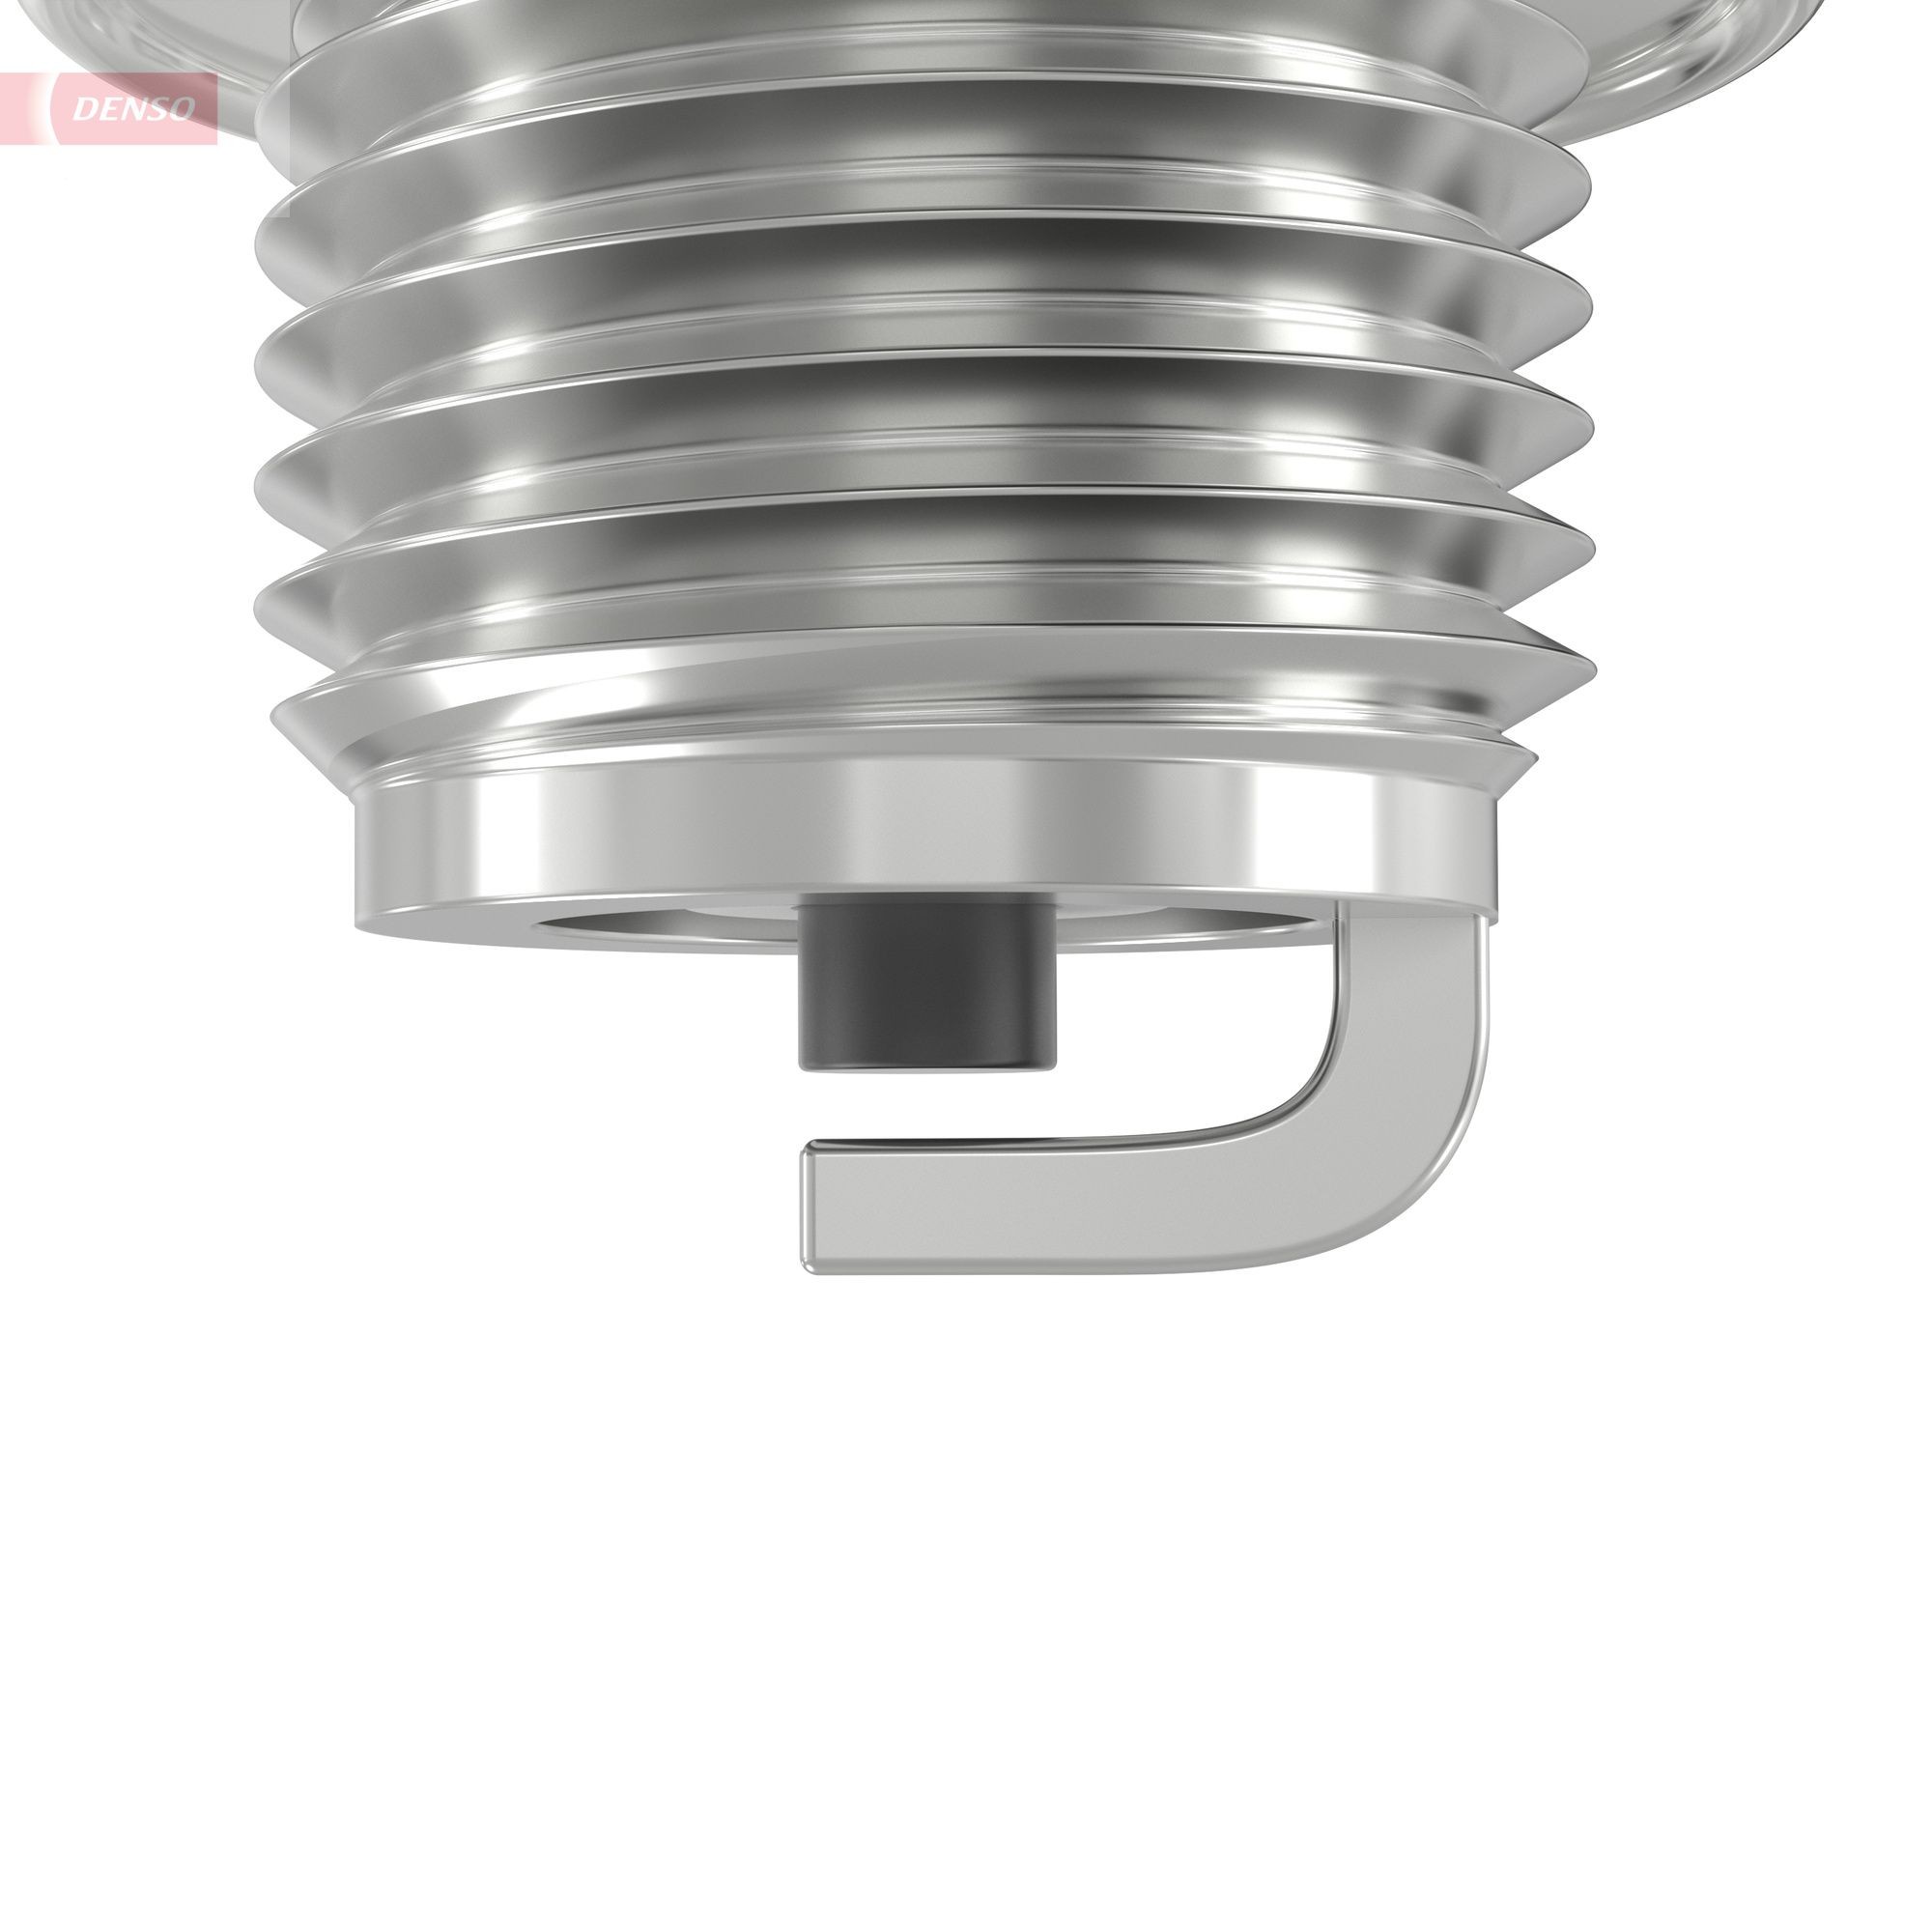 DENSO Spark plugs 3035 buy online